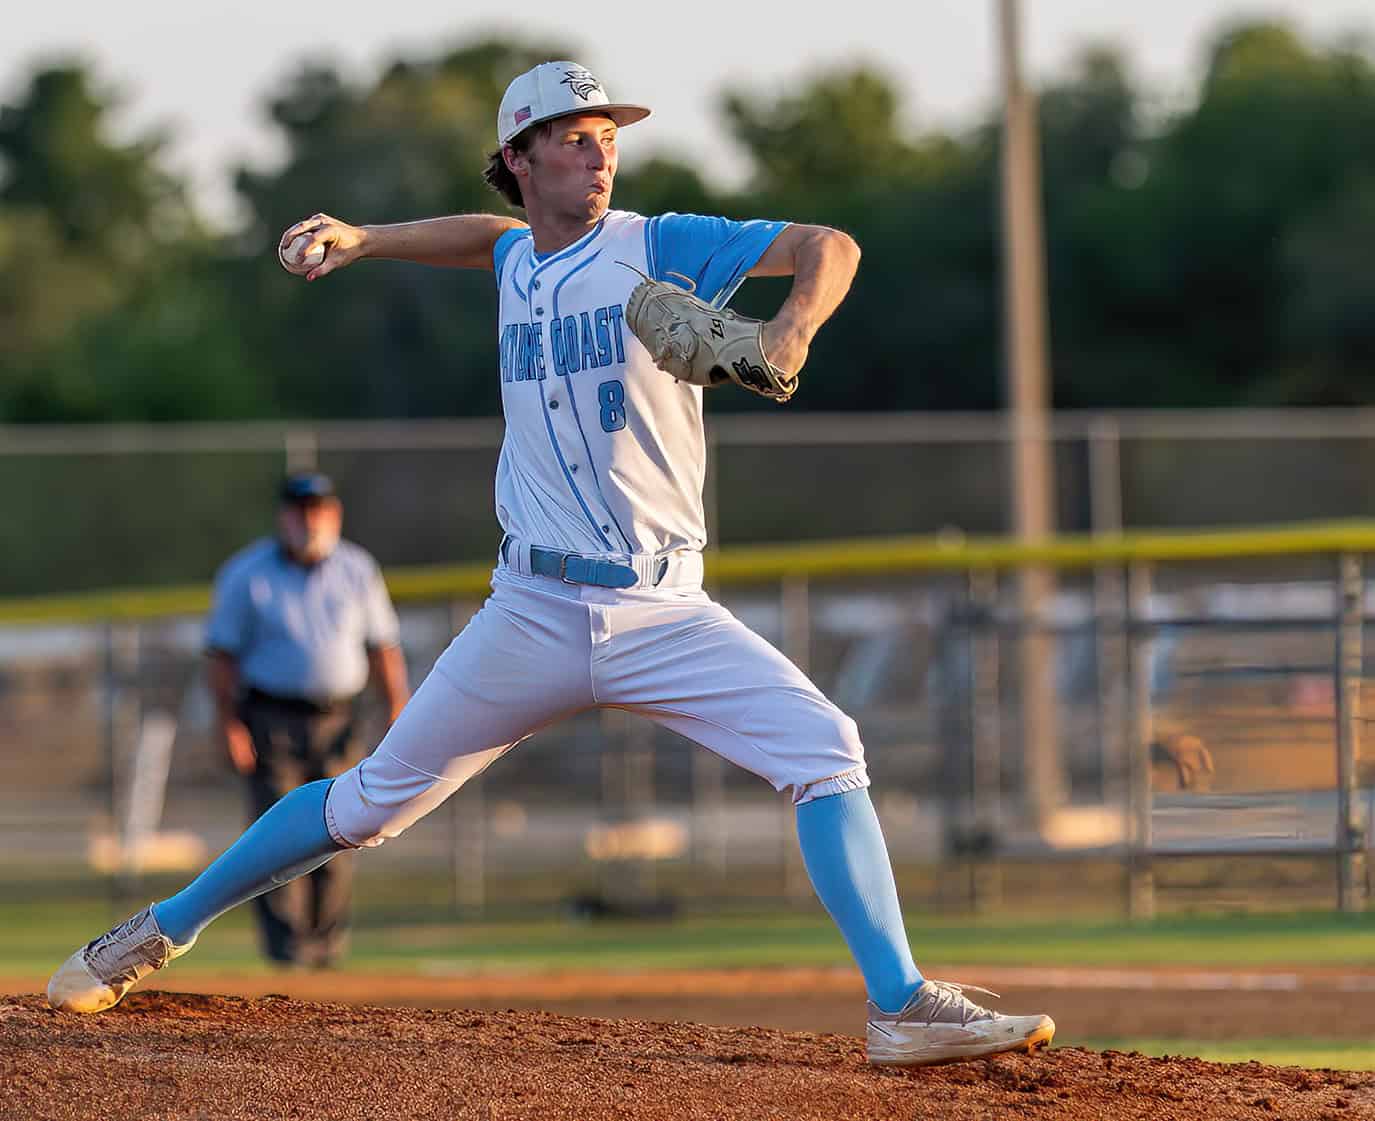 Nature Coast Tech’s, 8, Sean Keegan opened on the mound for the home team in the FHSAA 4A Regional semifinal game versus Hernando High. Photo by [Joseph Dicristofalo]